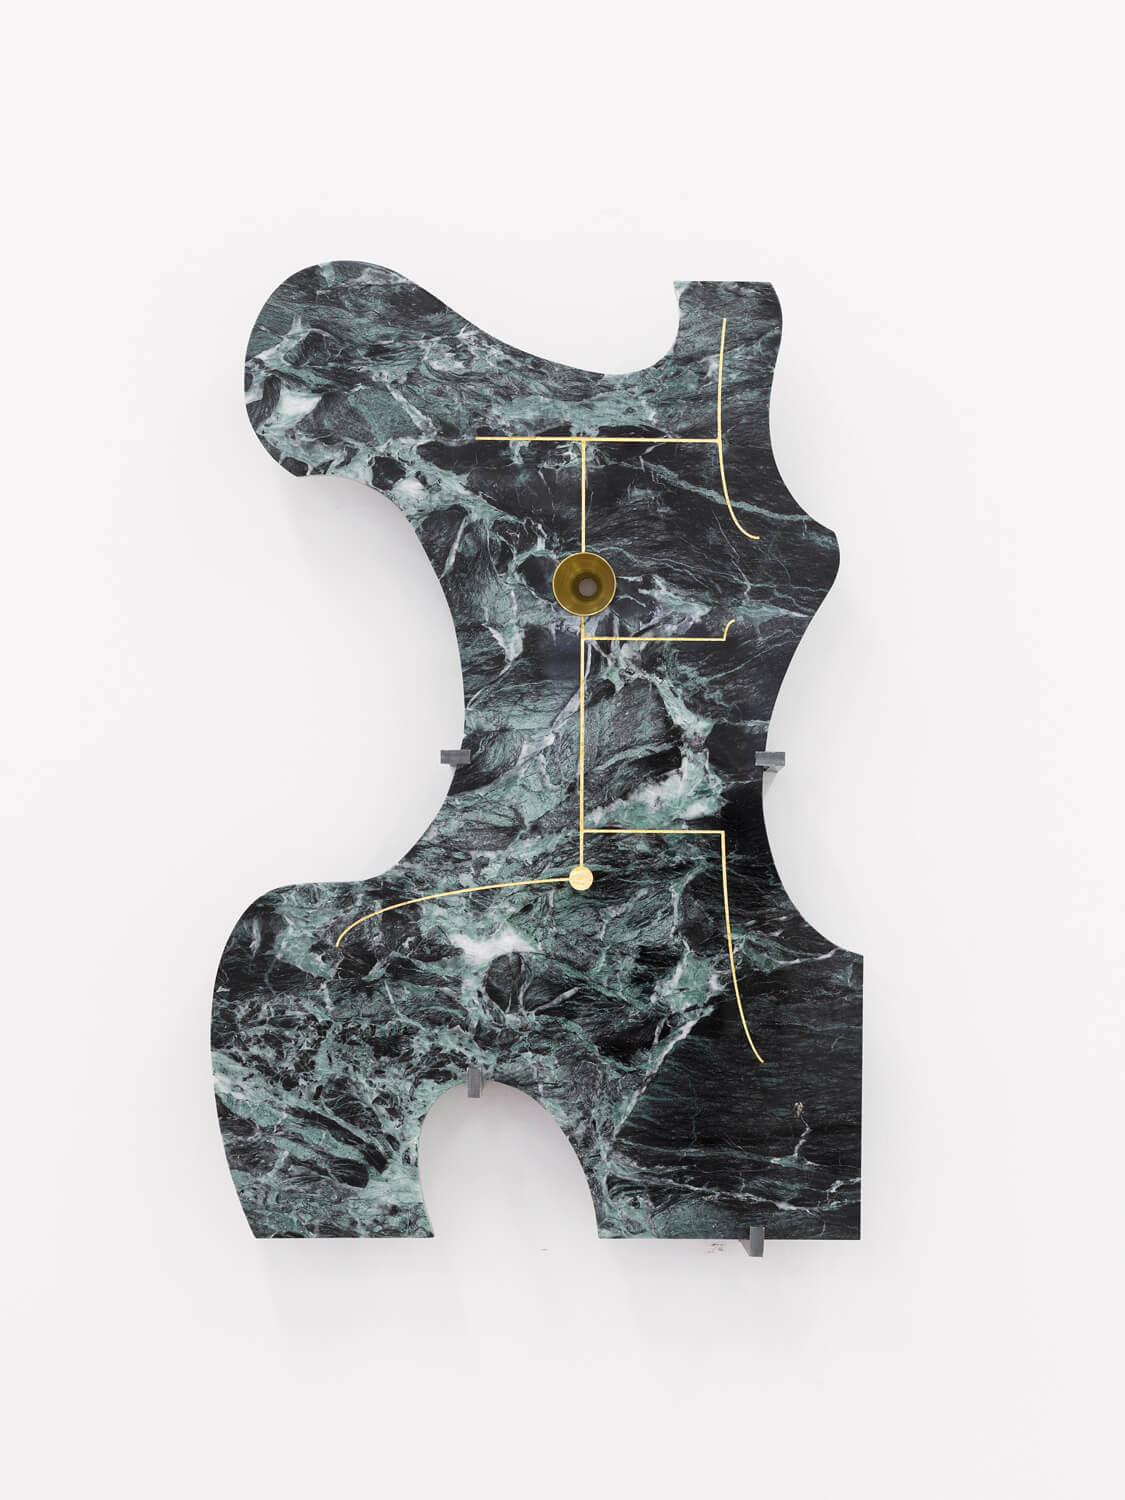 George Henry Longly, Indiscretion (2016) Wall-mounted marble